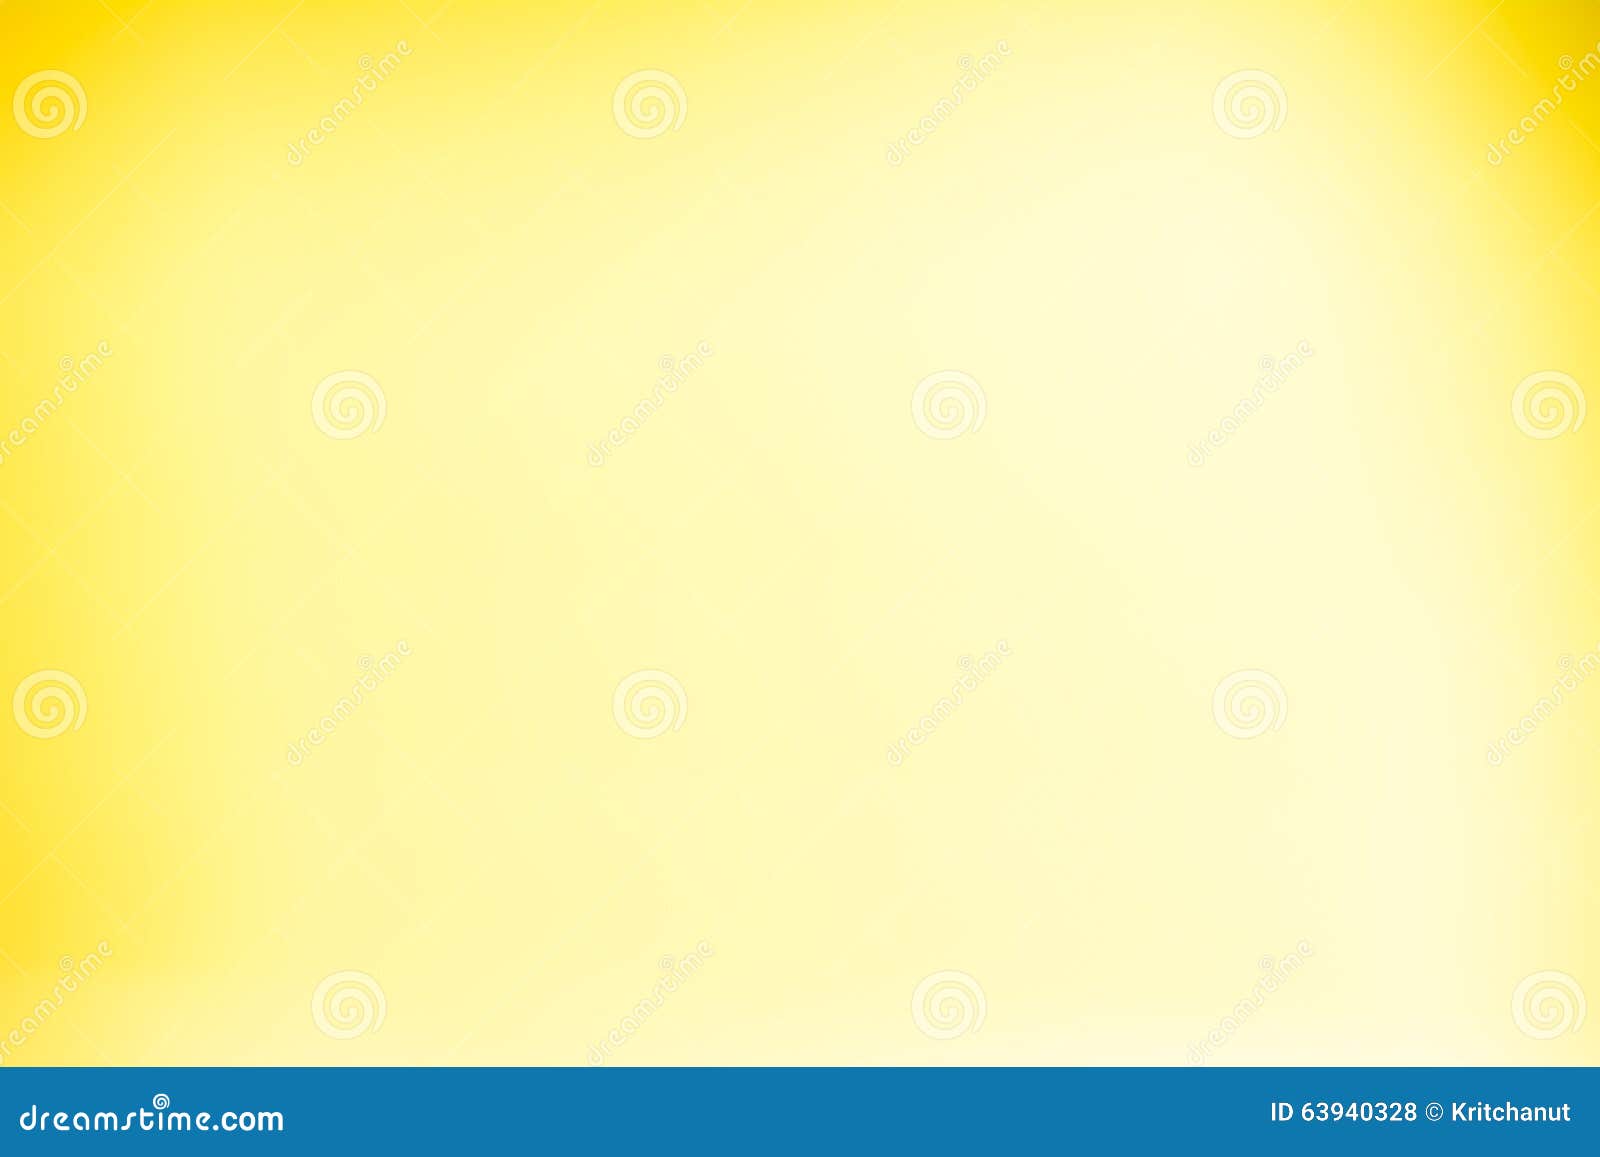 Yellow gradient background stock photo. Image of abstract - 63940328